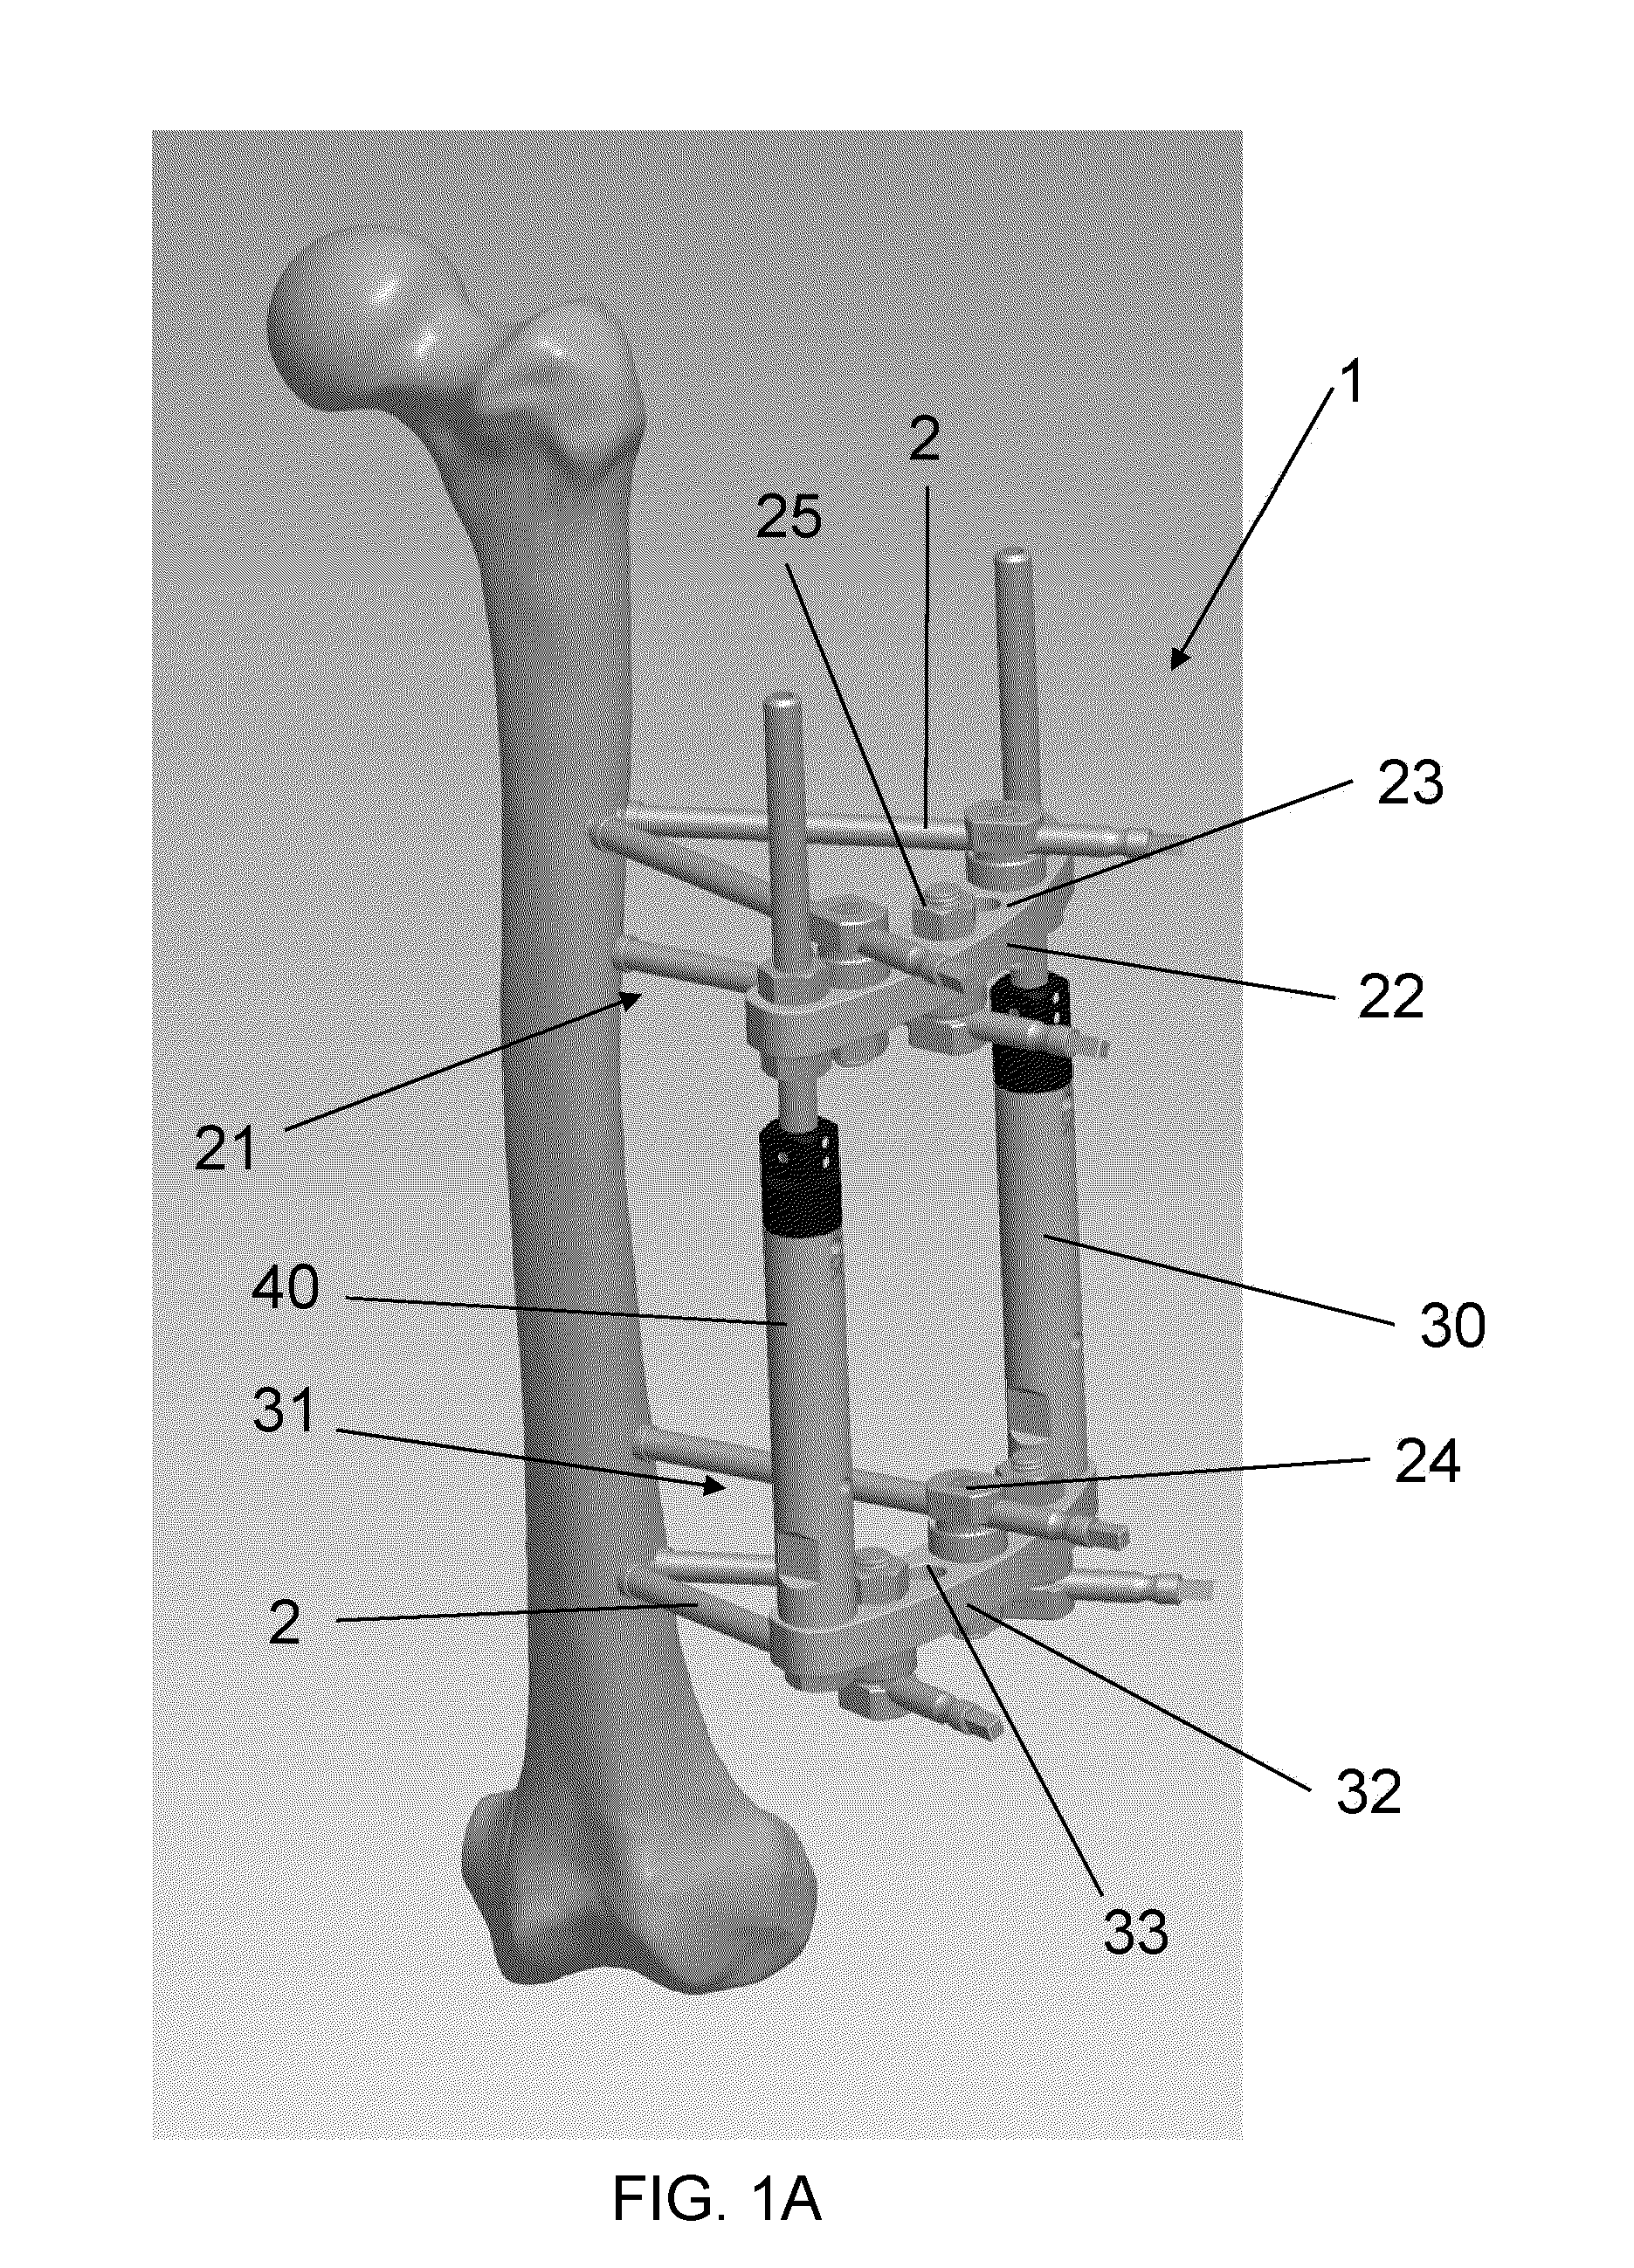 Method for Treating a Fracture of a Bone Having a Medullary Canal